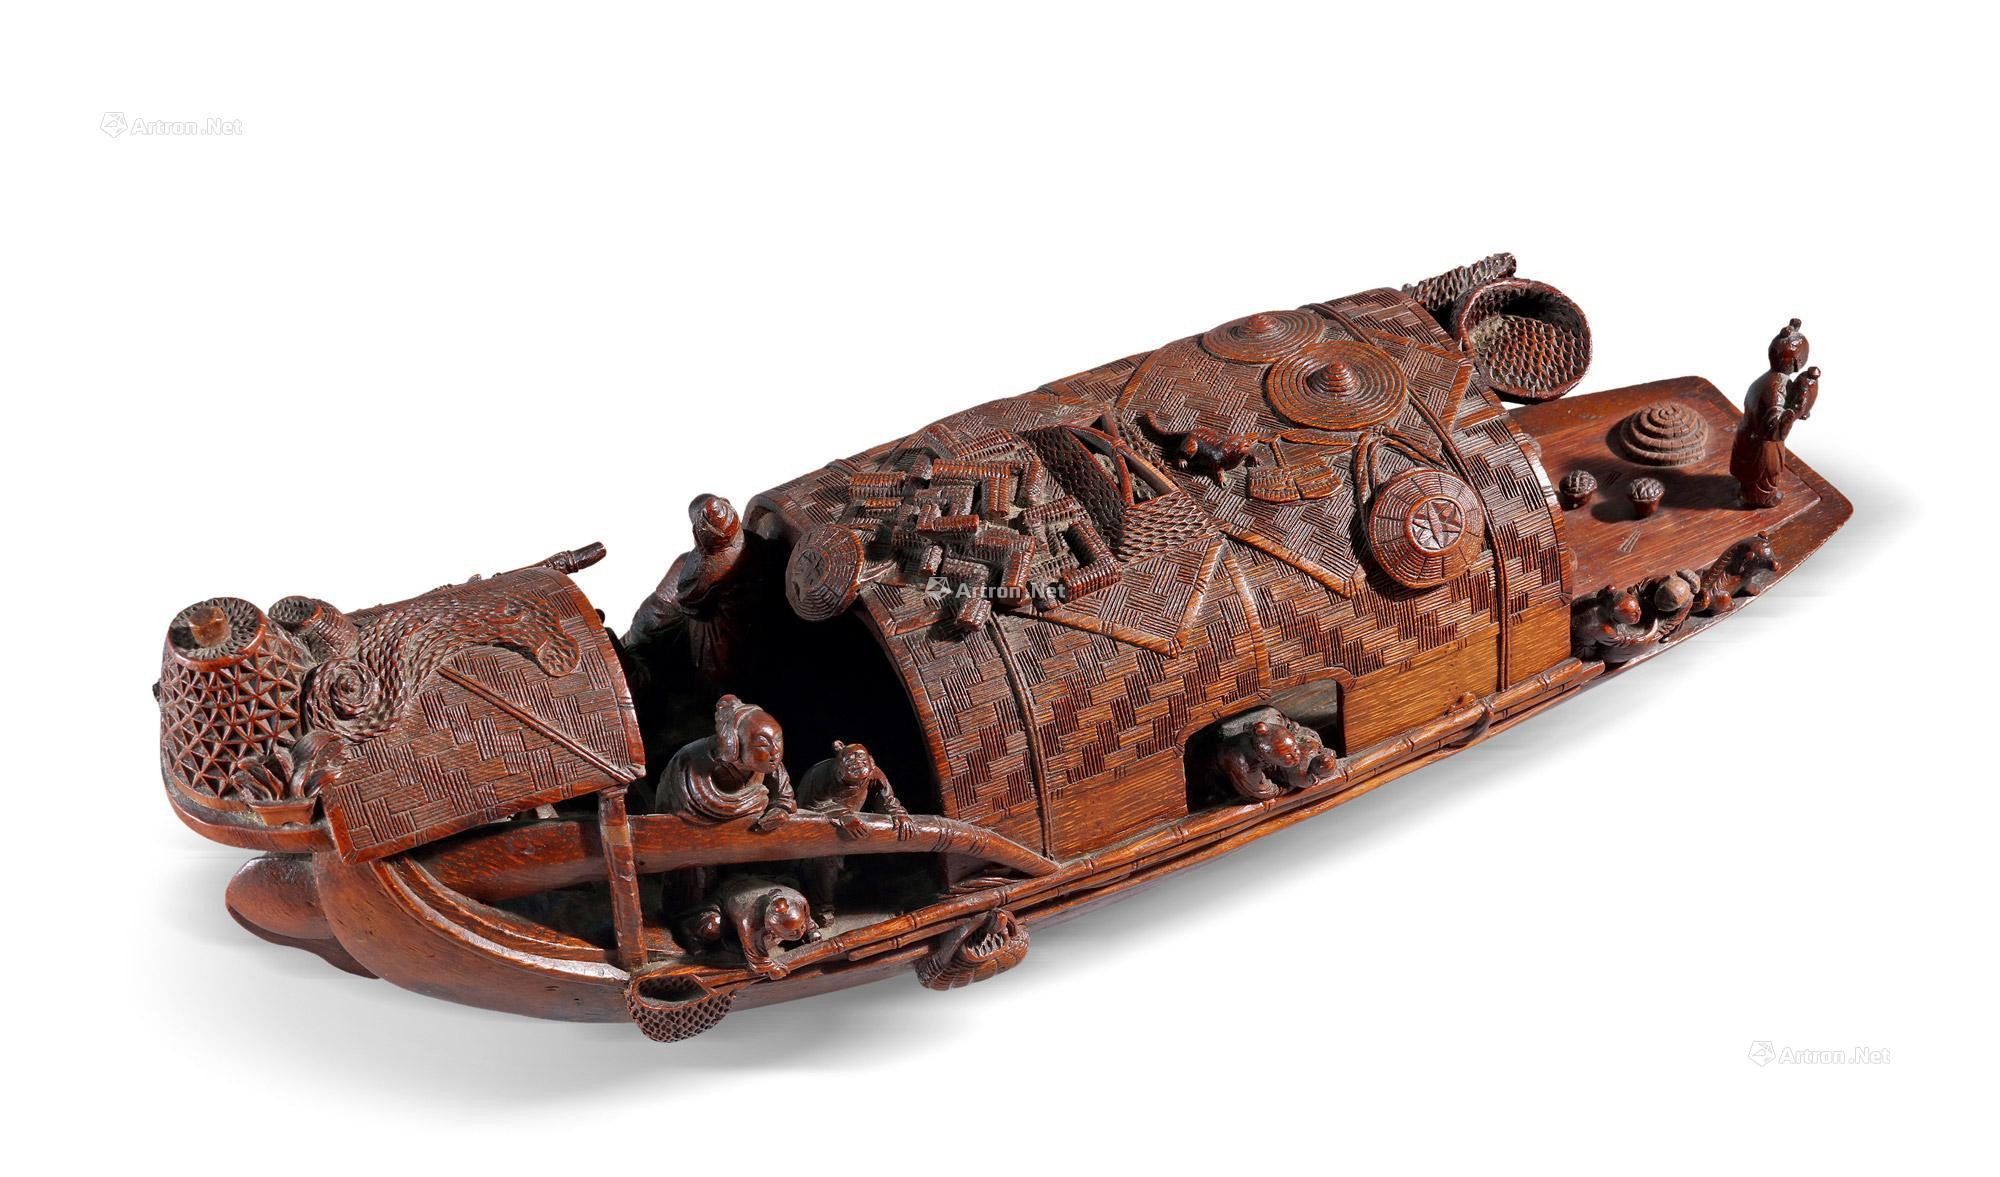 A CARVED BAMBOO BOAT-FORM SCHOLAR SCULPTURE